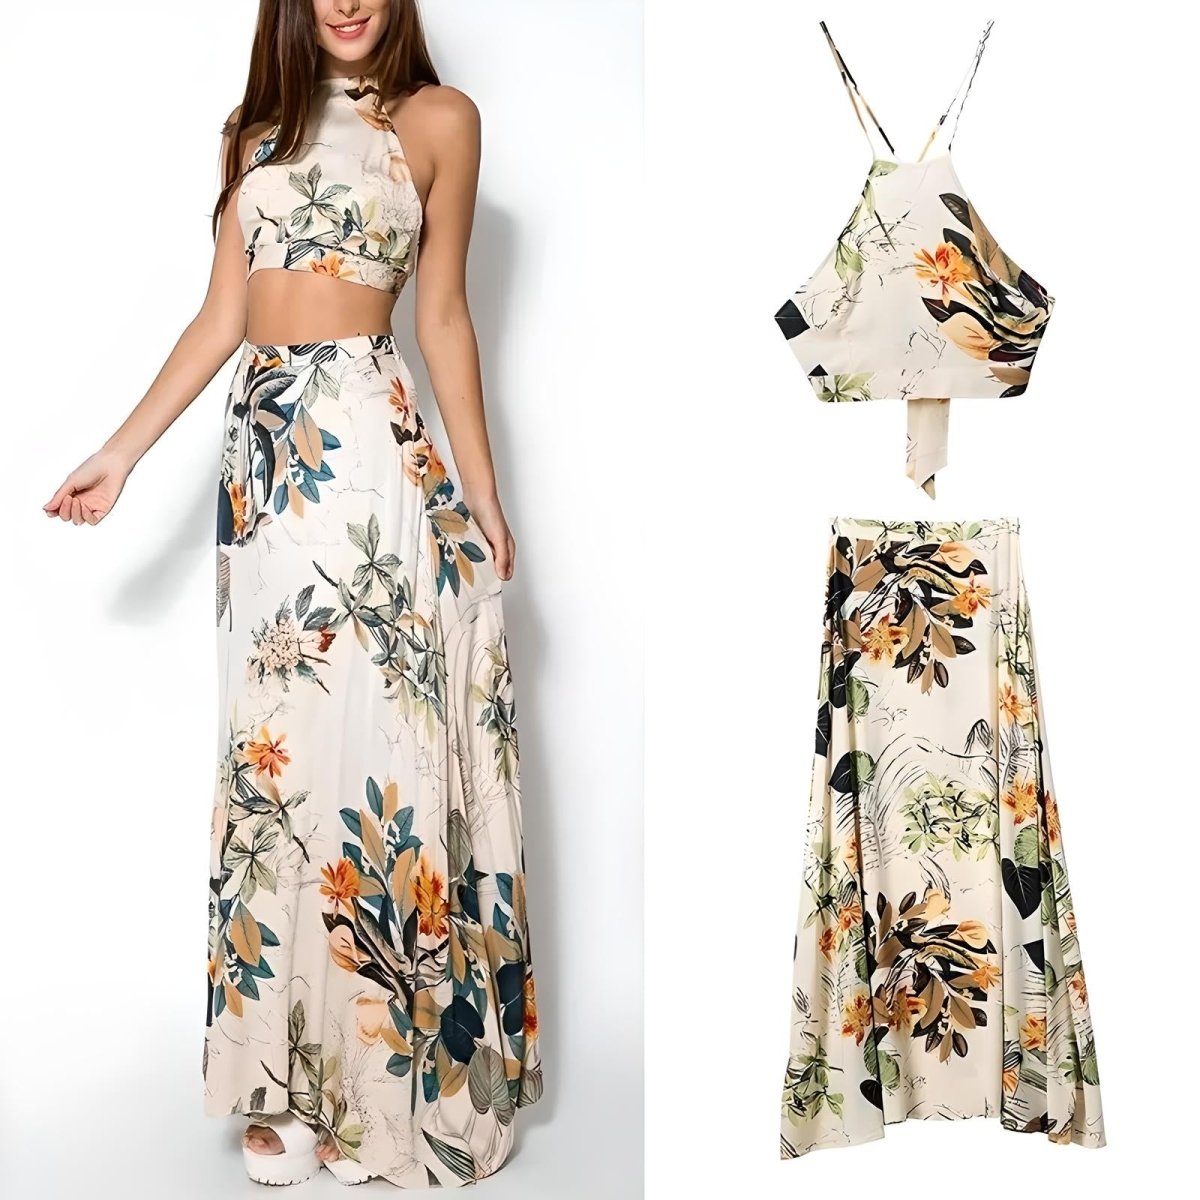 The image is showcasing a Women's Summer Boho Maxi Dress Two - Piece Outfit Set Backless Camisole Beach Dress Bohemian Style Halter Bandage Sundress at Mommy & Lino's Closet